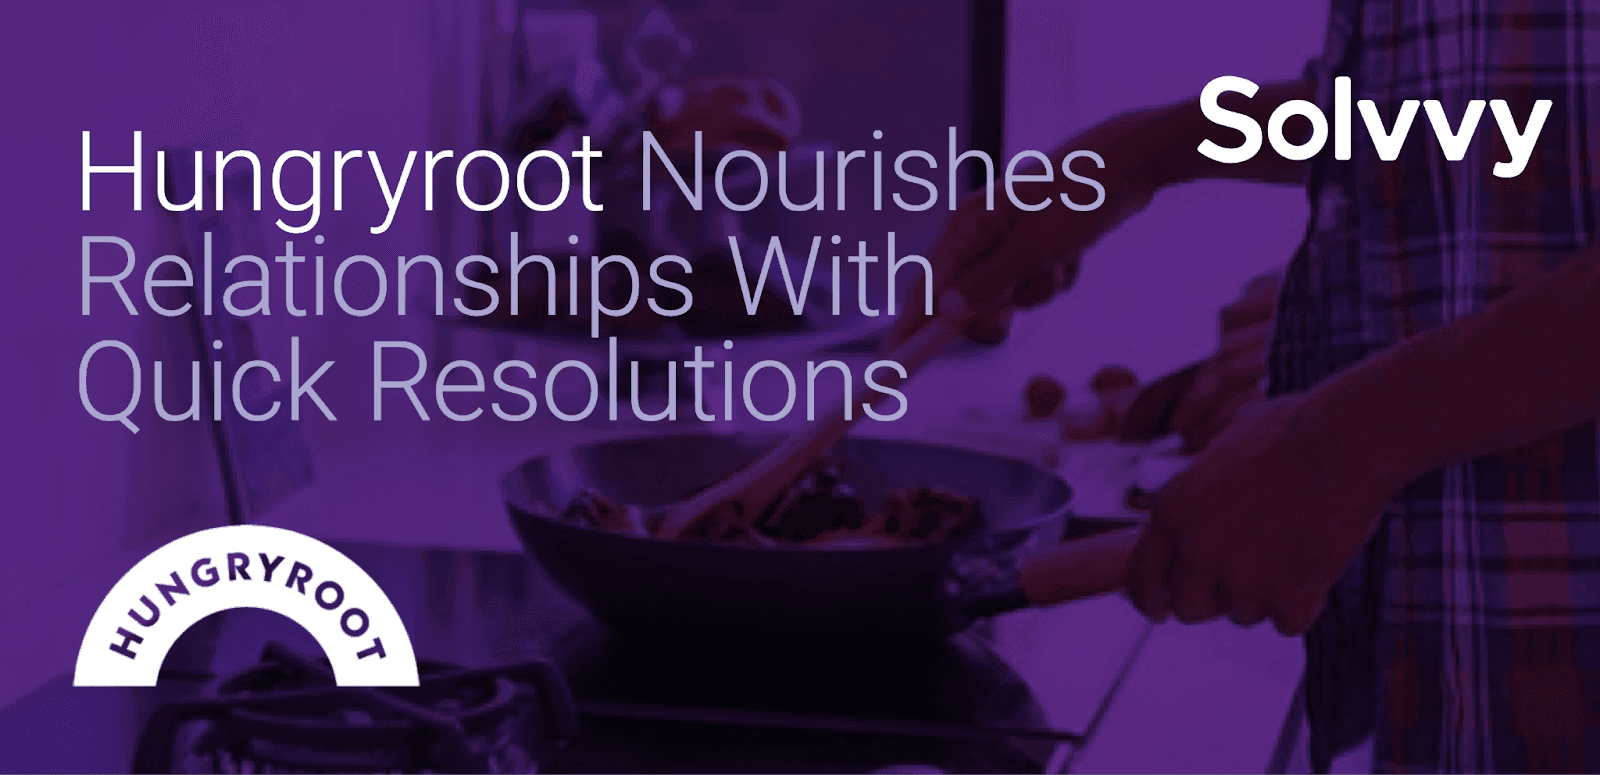 Hungryroot Nourishes Relationships With Quick Resolutions